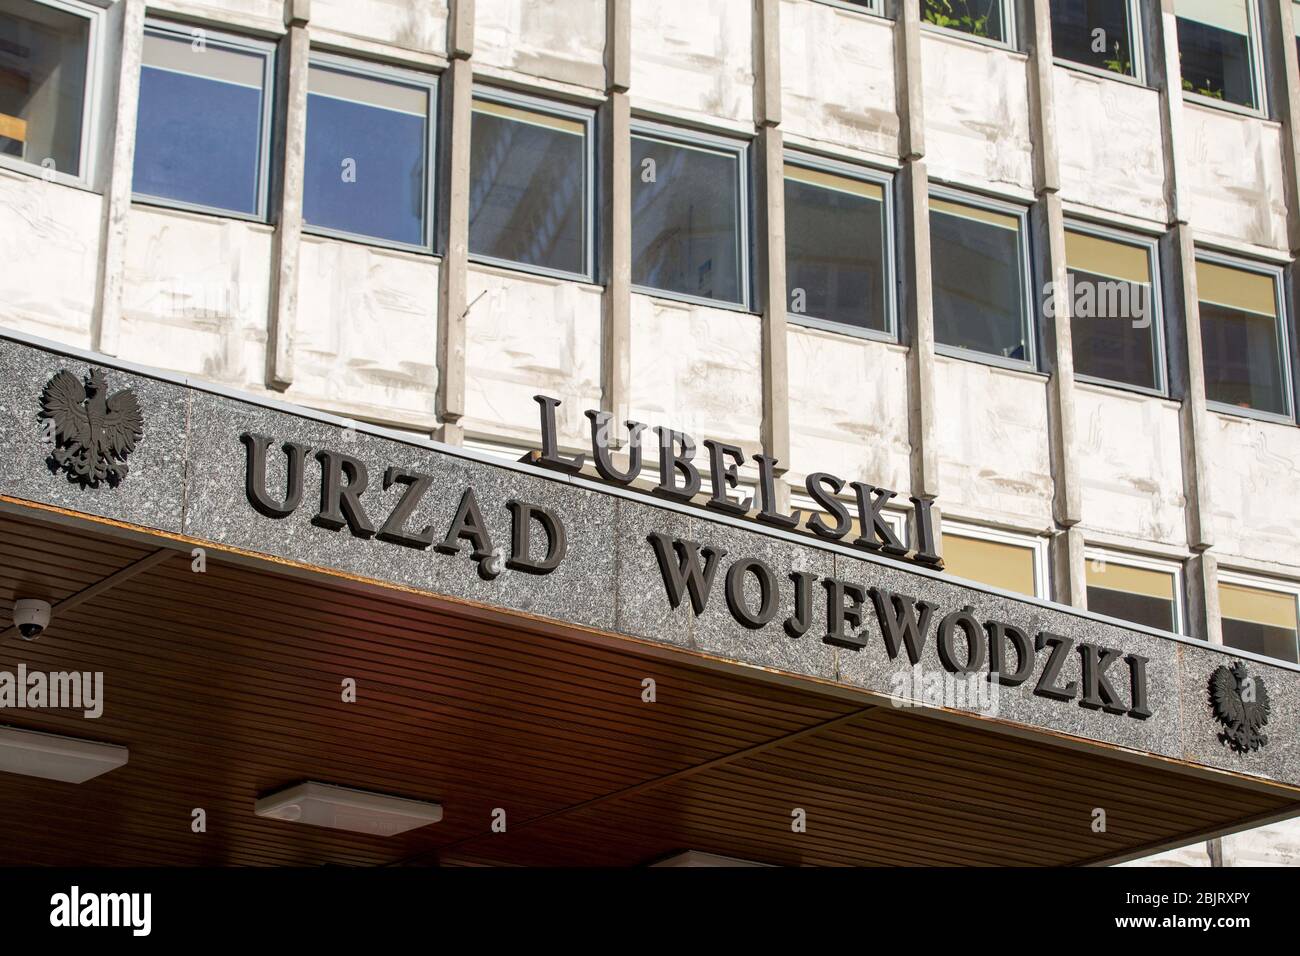 Lublin, Poland. 17th Apr, 2020. View of the Lubelski Urzad Wojewodzki (The Lubelskie Province Governor's Office) during the Coronavirus (COVID-19) lockdown crisis.Due to coronavirus restrictions on movement, bars and restaurants are closed and the streets of Polish cities are depopulated. Credit: Karol Serewis/SOPA Images/ZUMA Wire/Alamy Live News Stock Photo